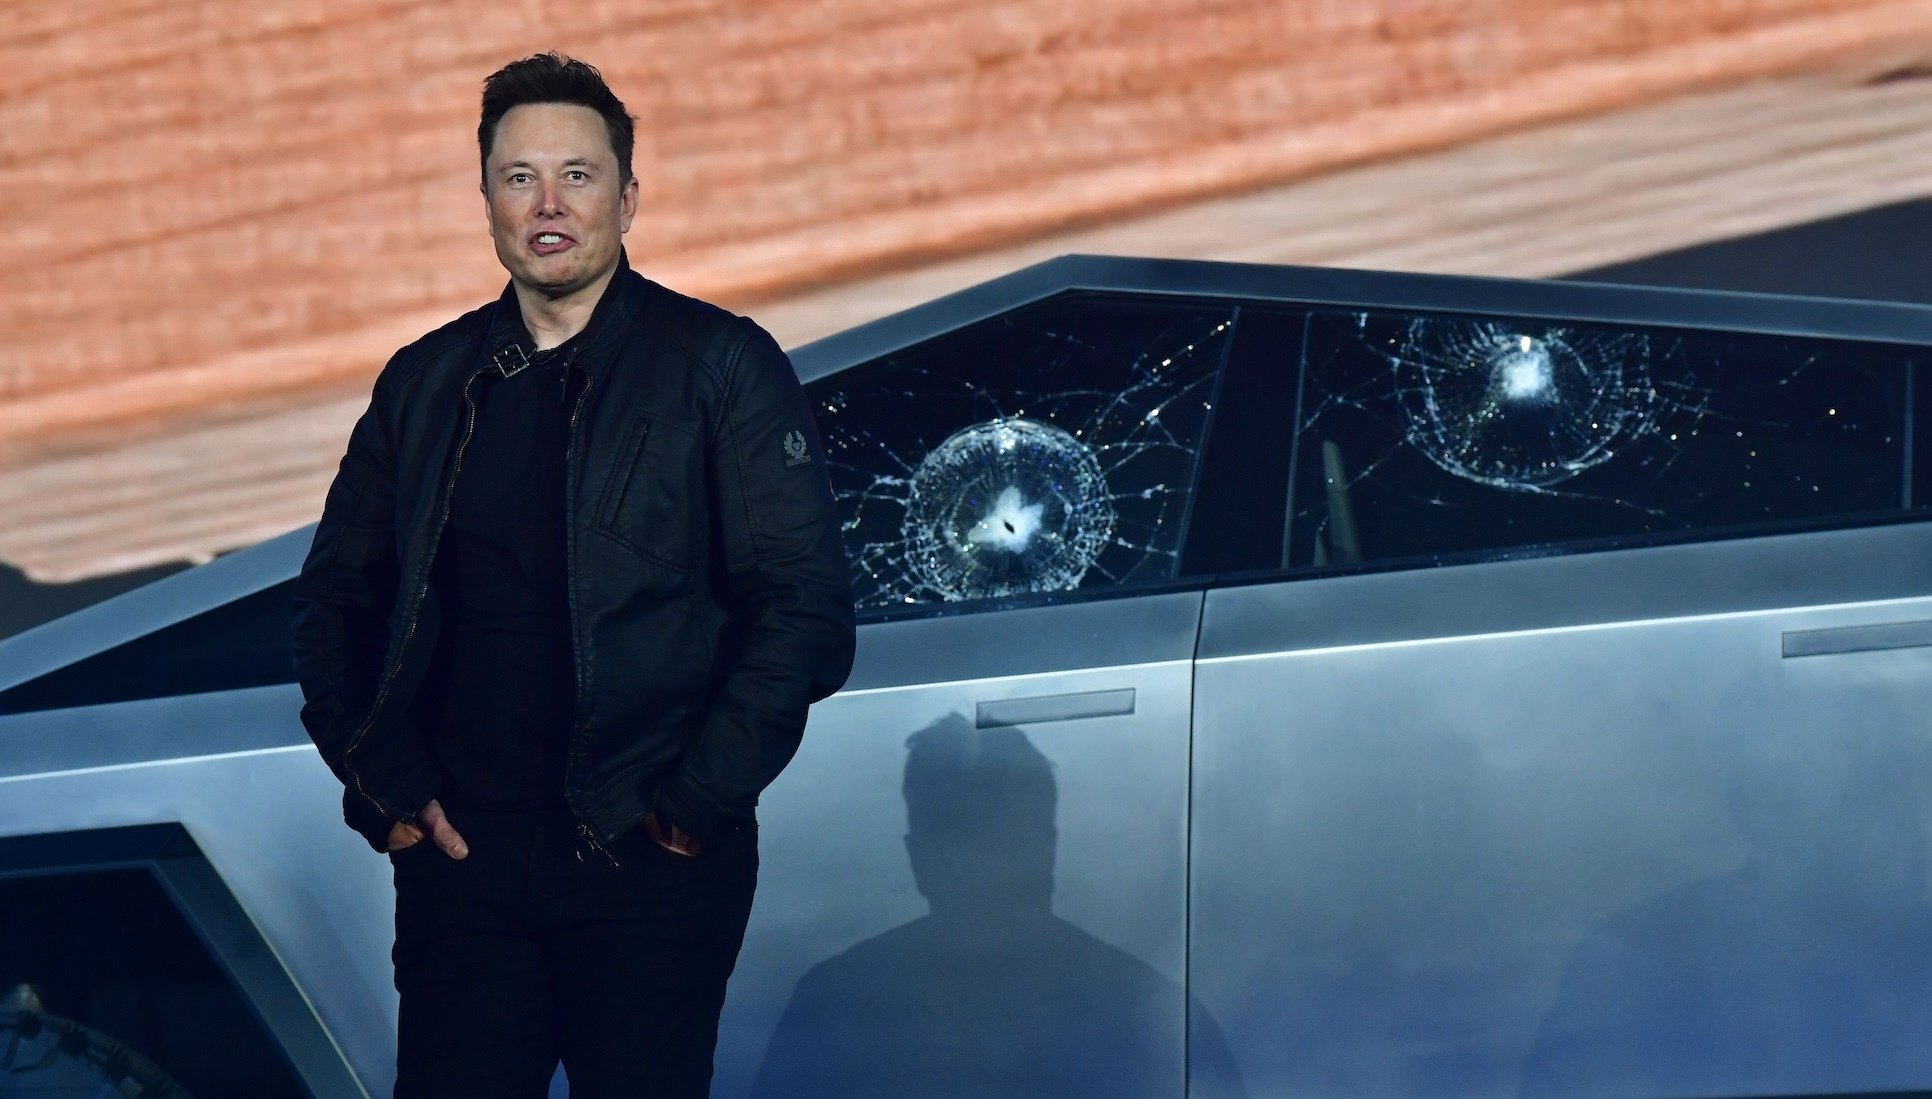 Elon Musk standing in front of a Cybertruck with two bullet marks in its windows.